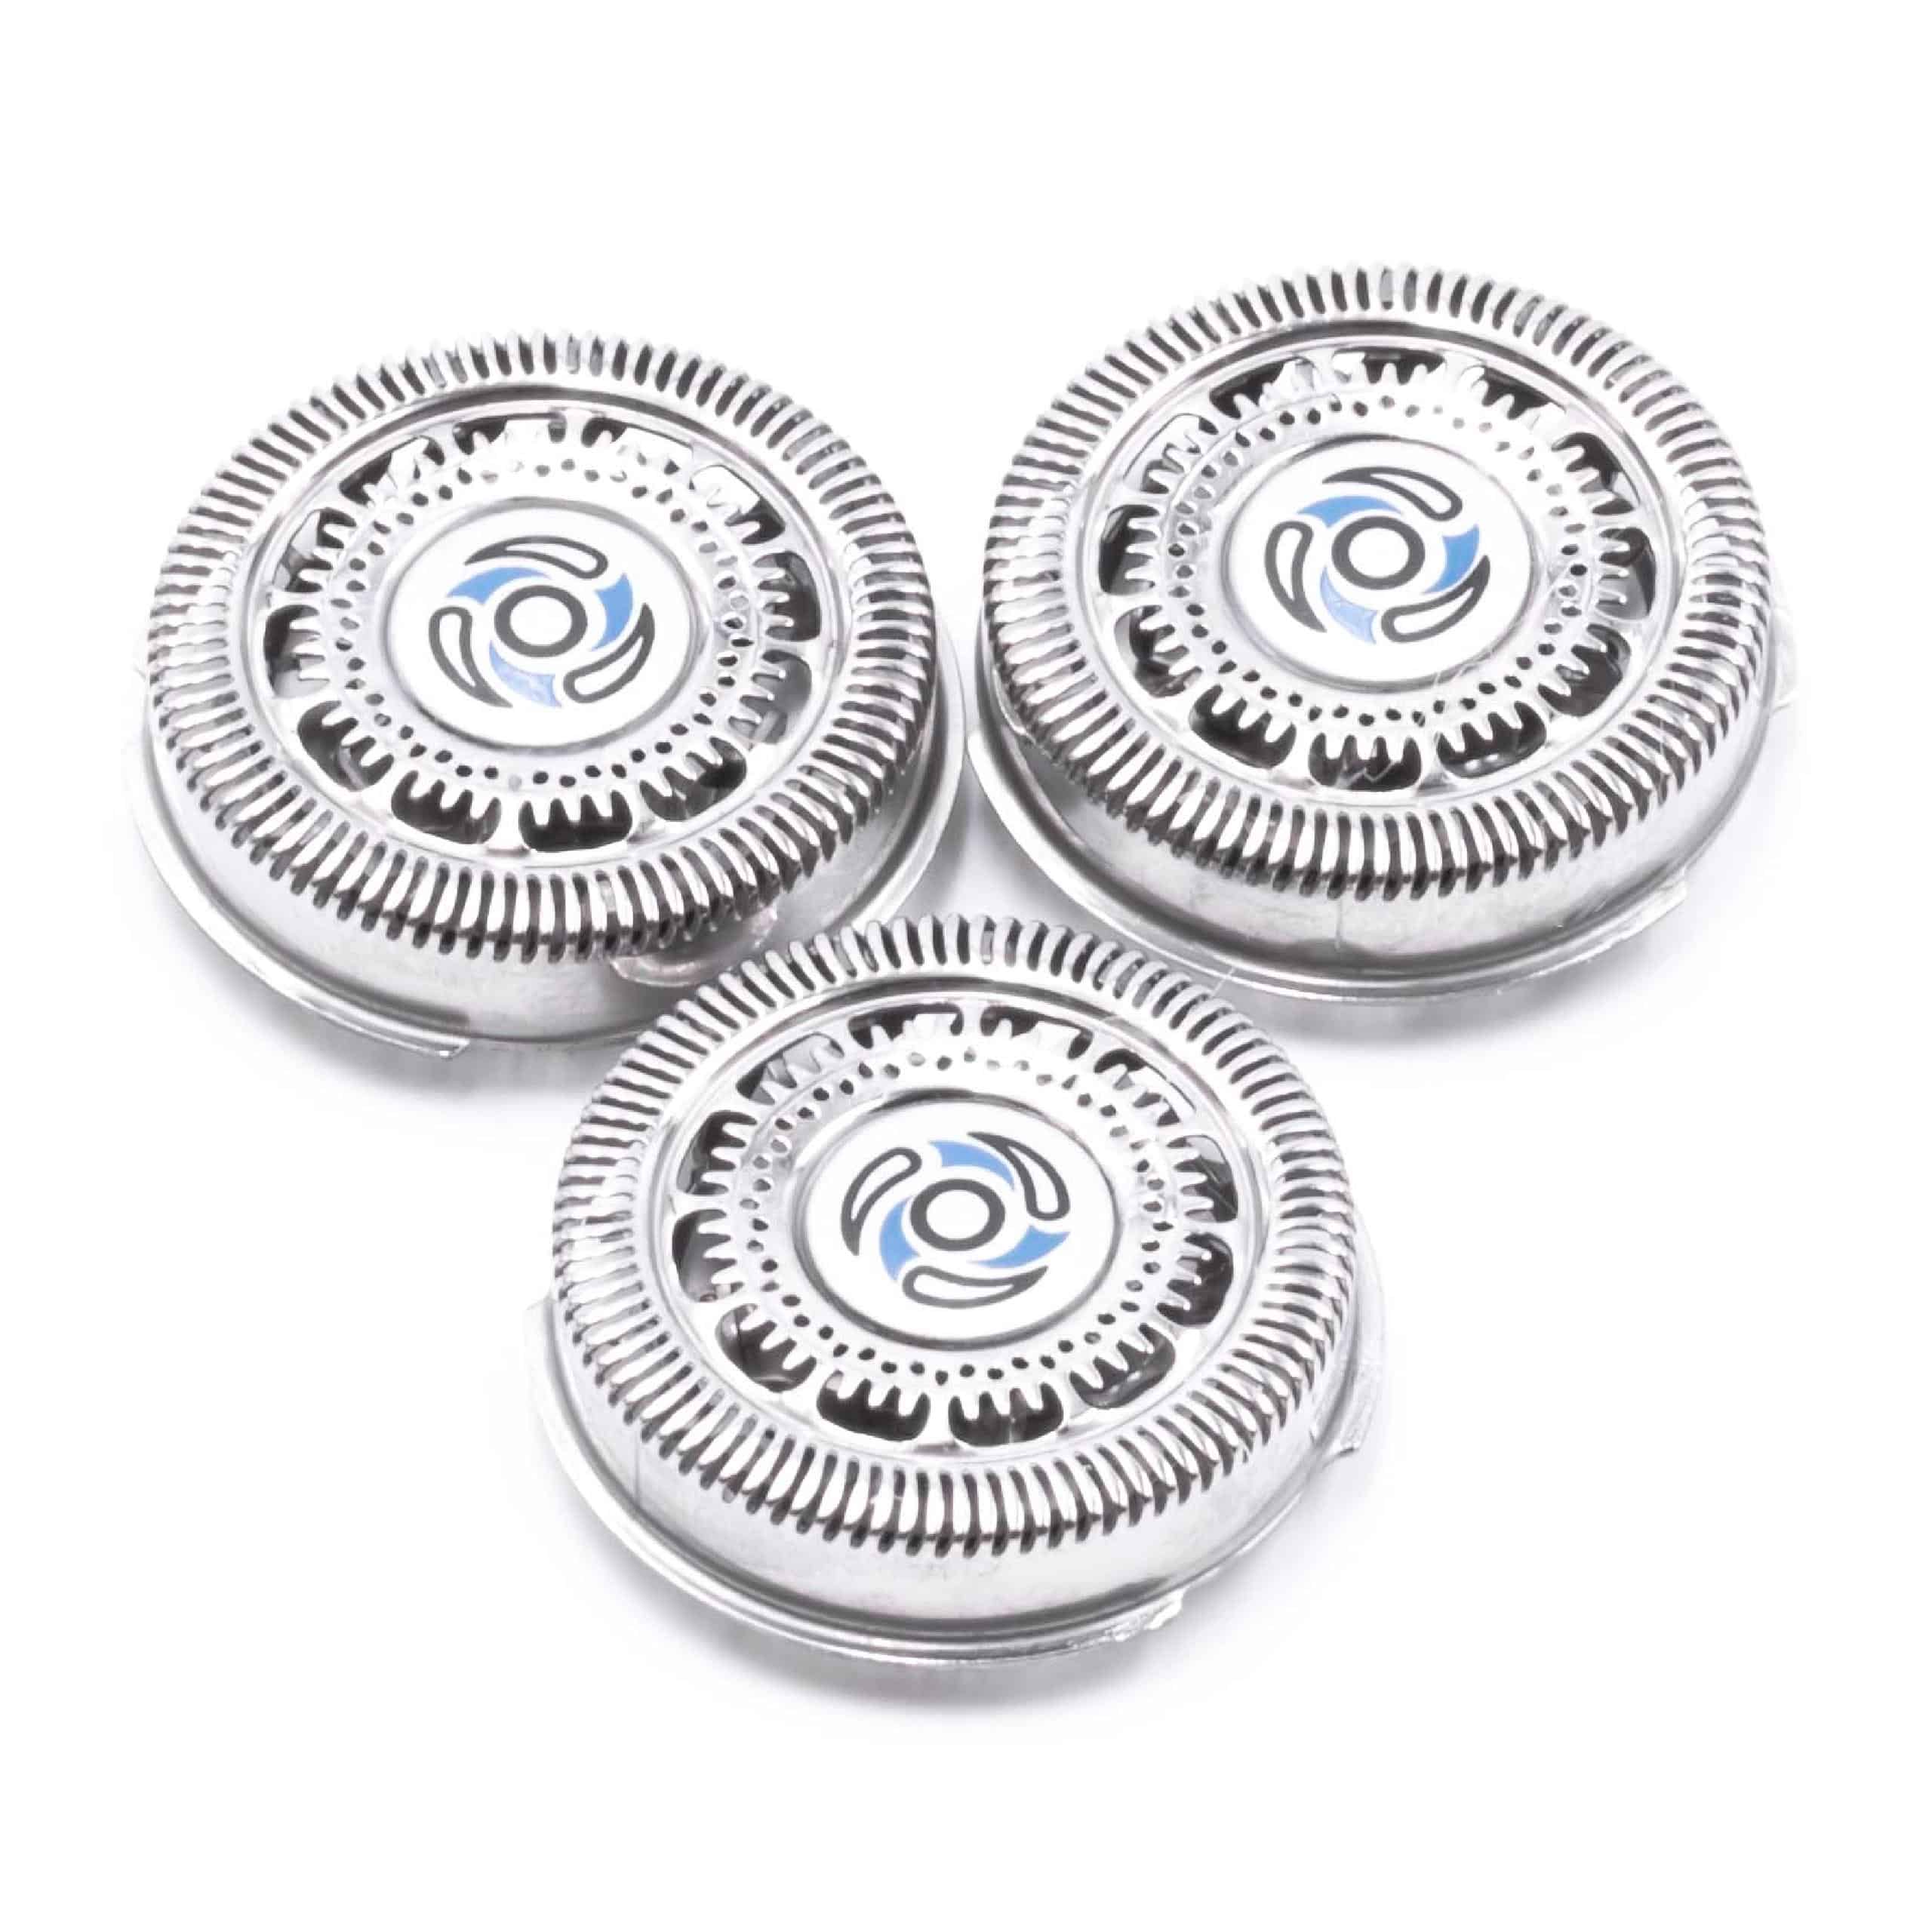 3x shaving head as Replacement for Philips SH70/50, SH70/60, SH70, SH71 for Philips Shaver - Stainless Steel